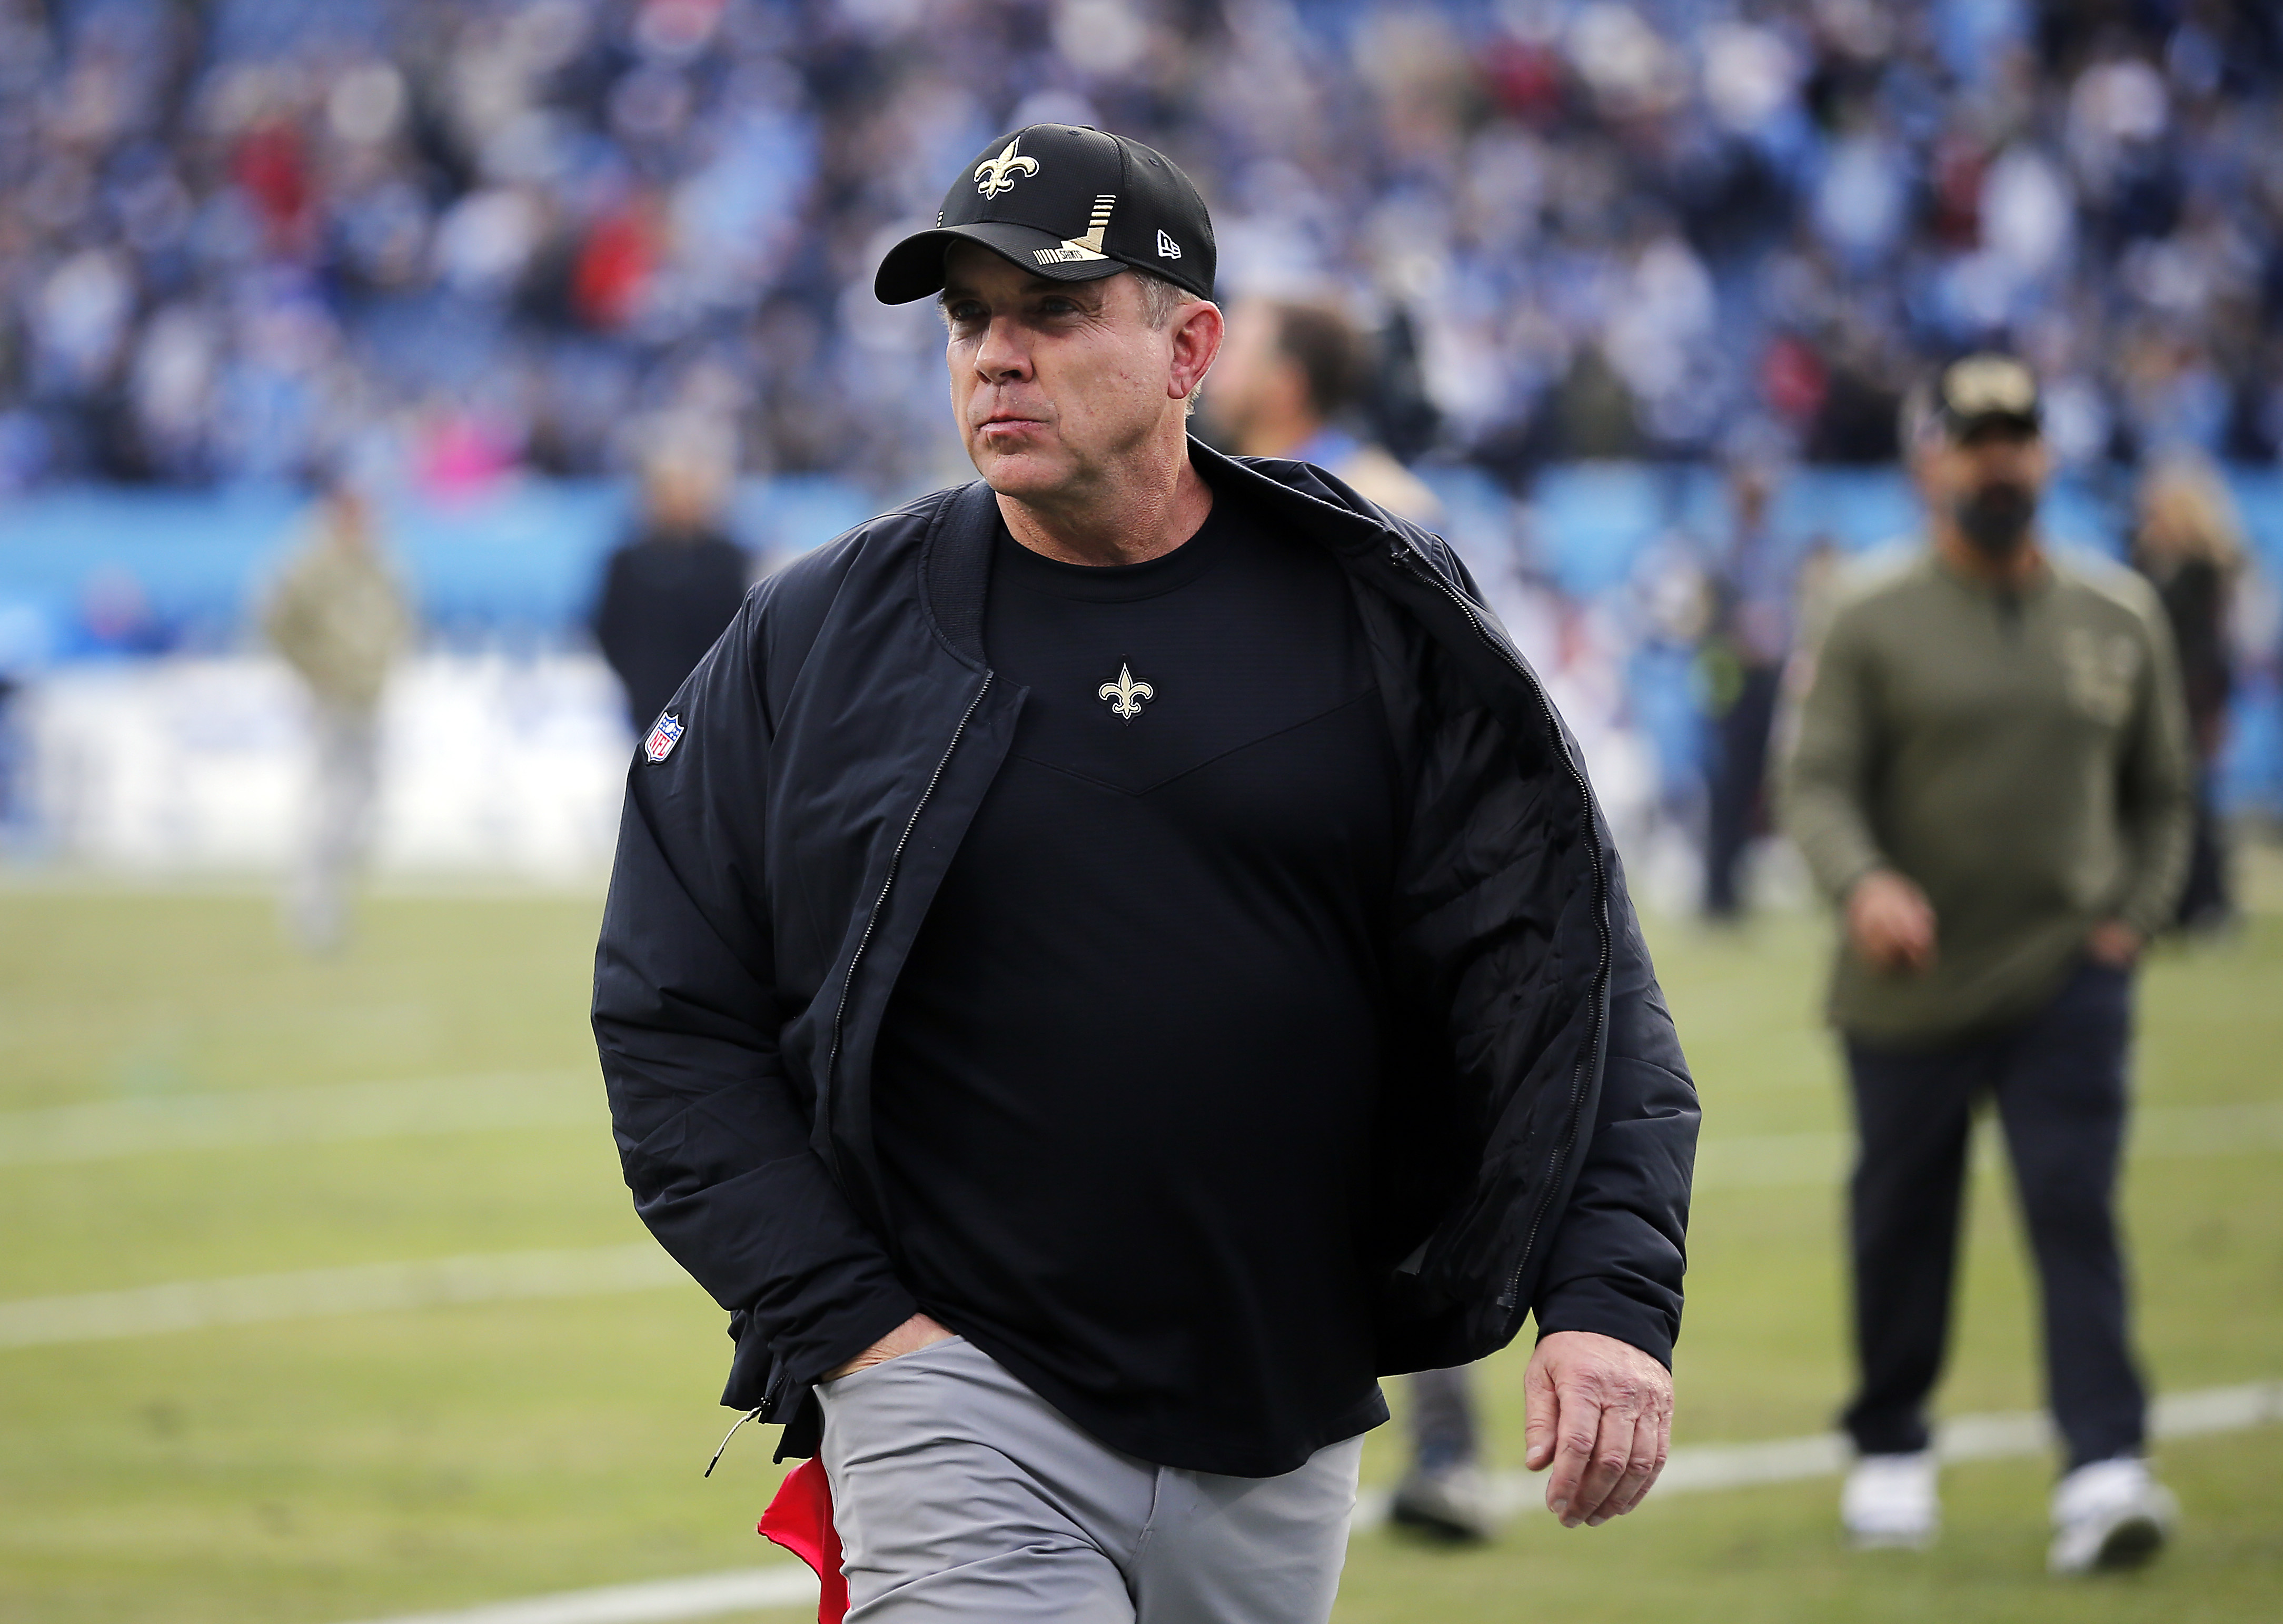 Saints coach Sean Payton leaves field after loss to the Titans